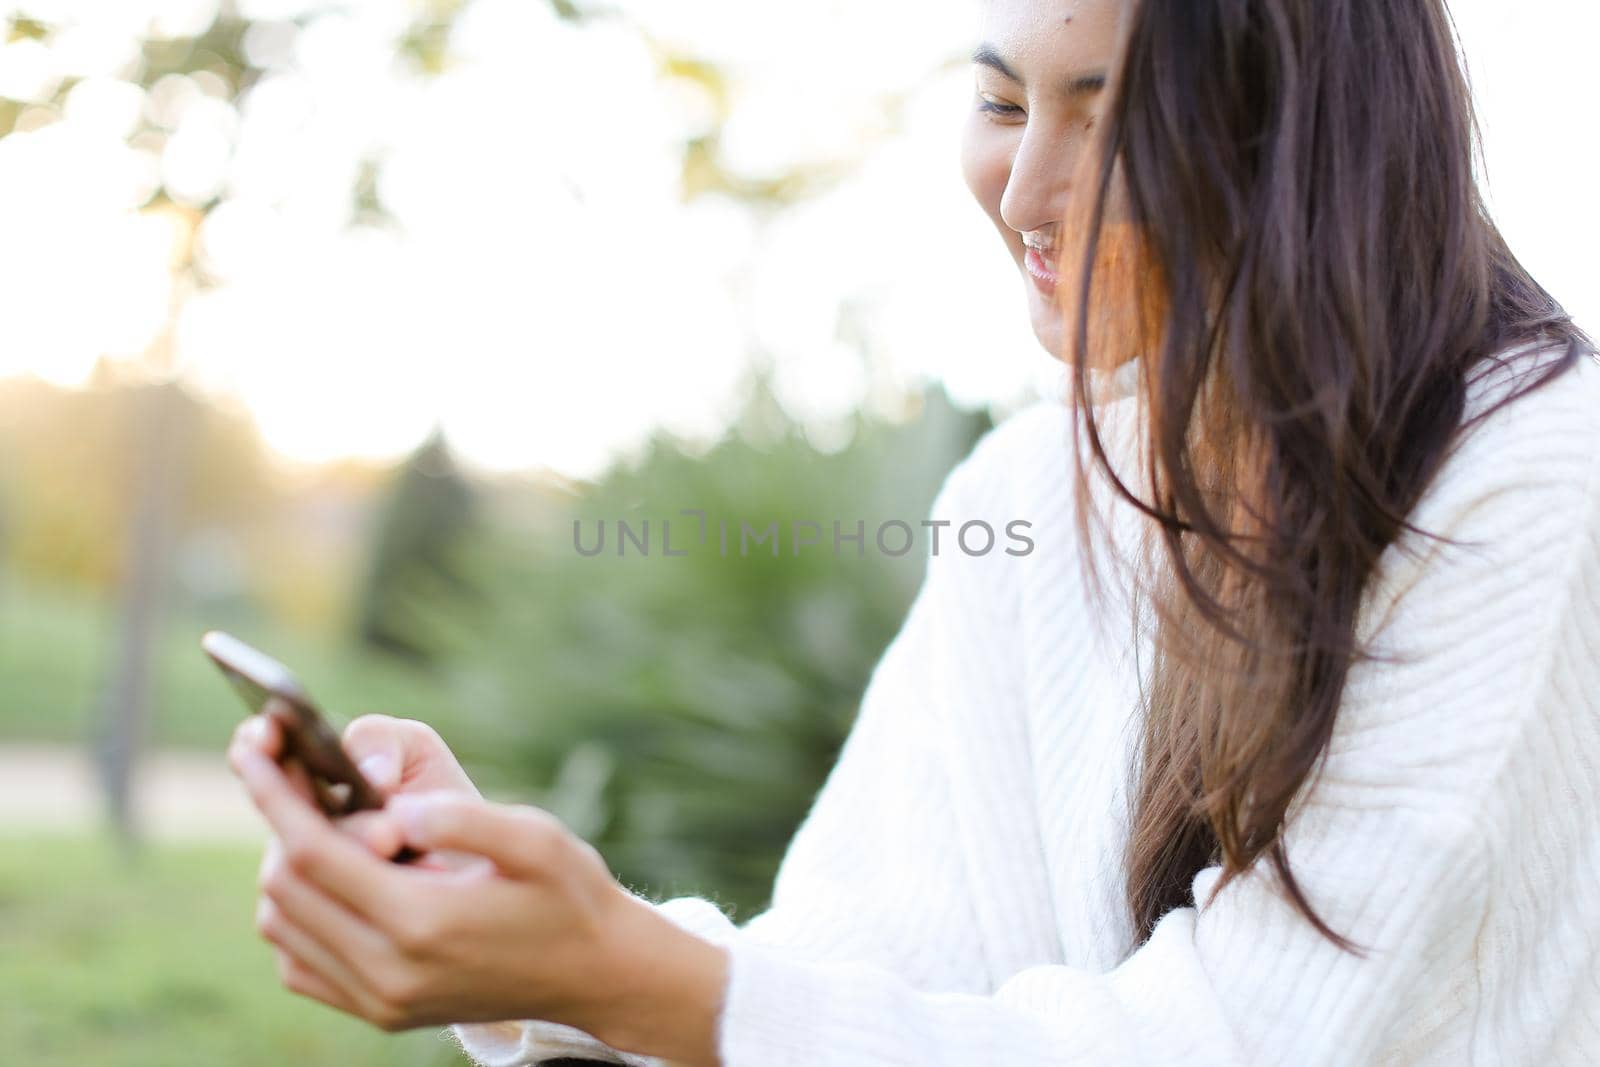 Focus on chinese woman keeping smartphone and smiling. Concept of asian modern technology.